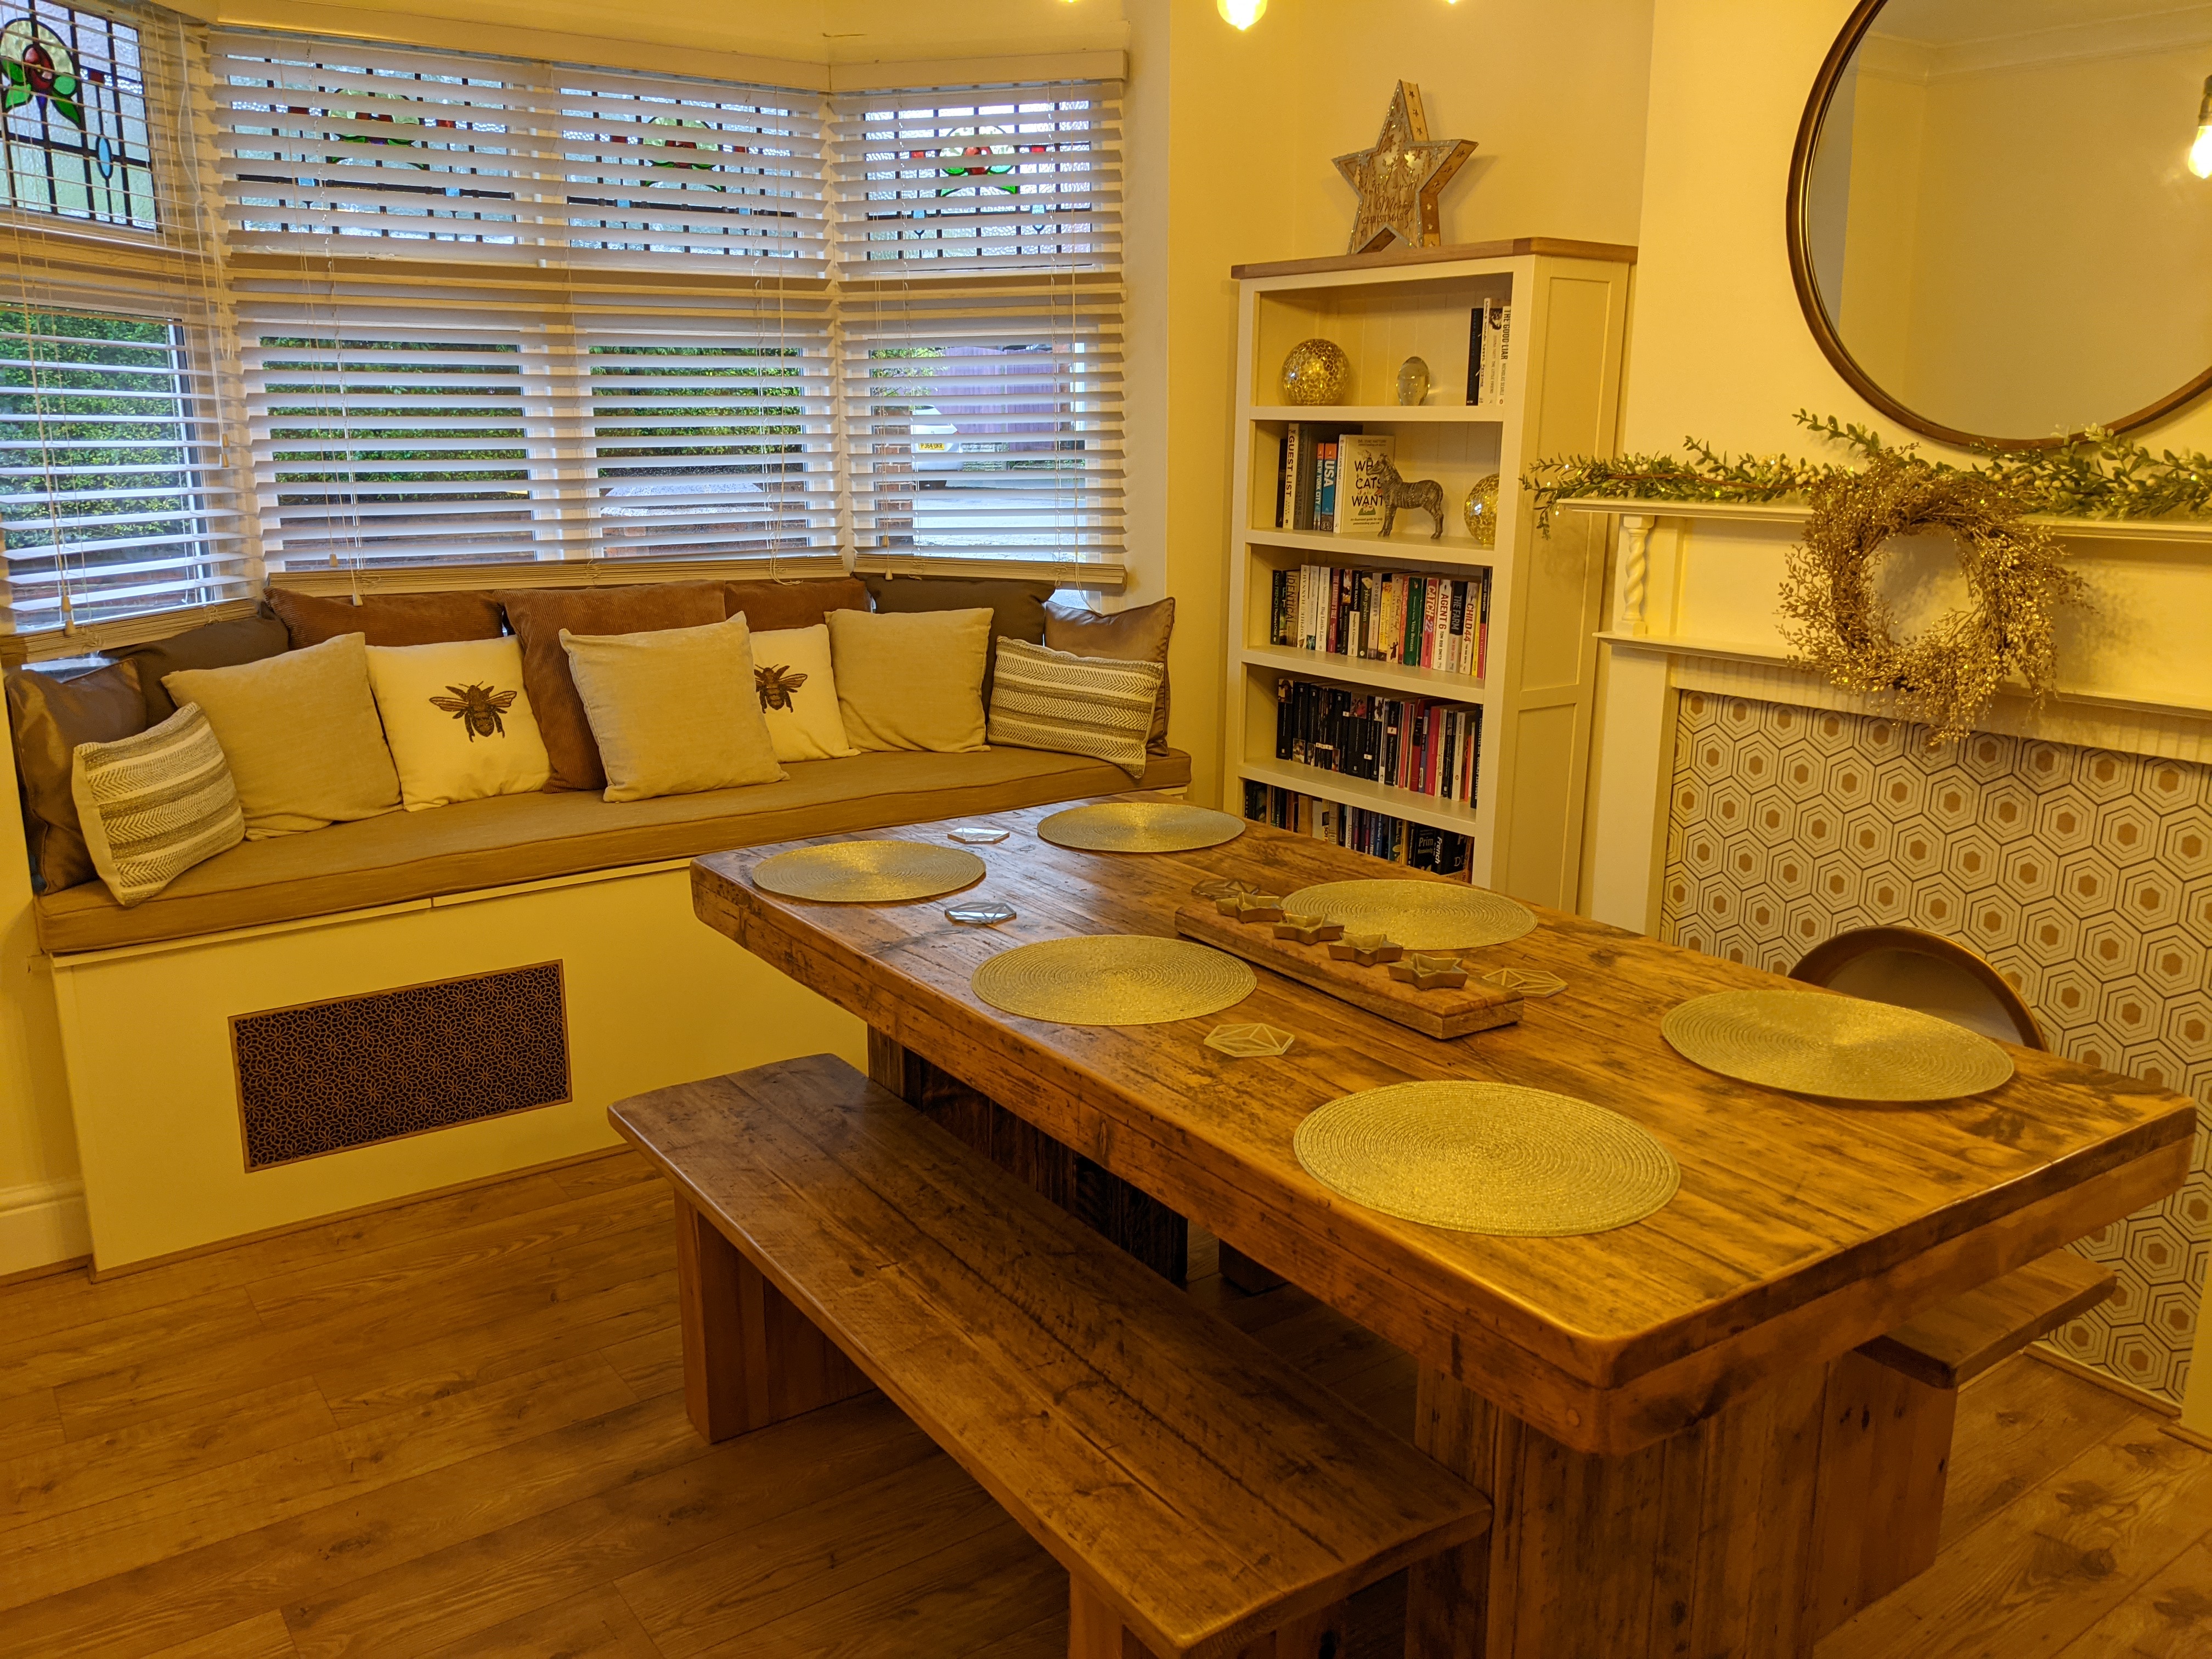 Dining room after re-decoration and window seat